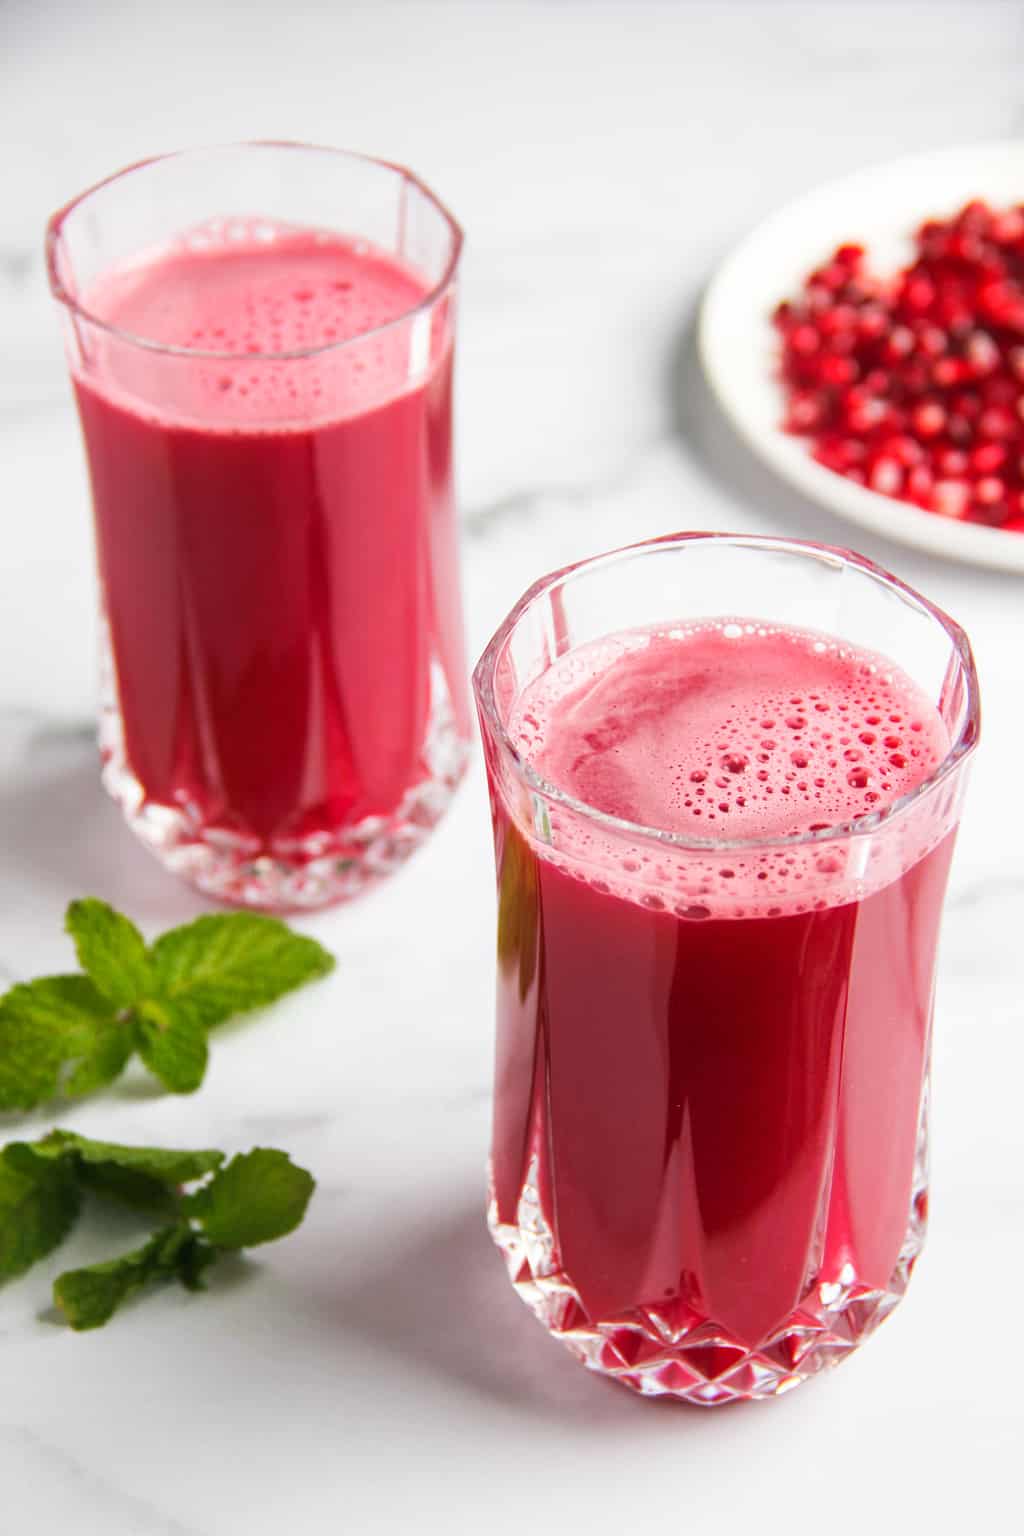 How to make homemade Pomegranate Juice - Ministry of Curry